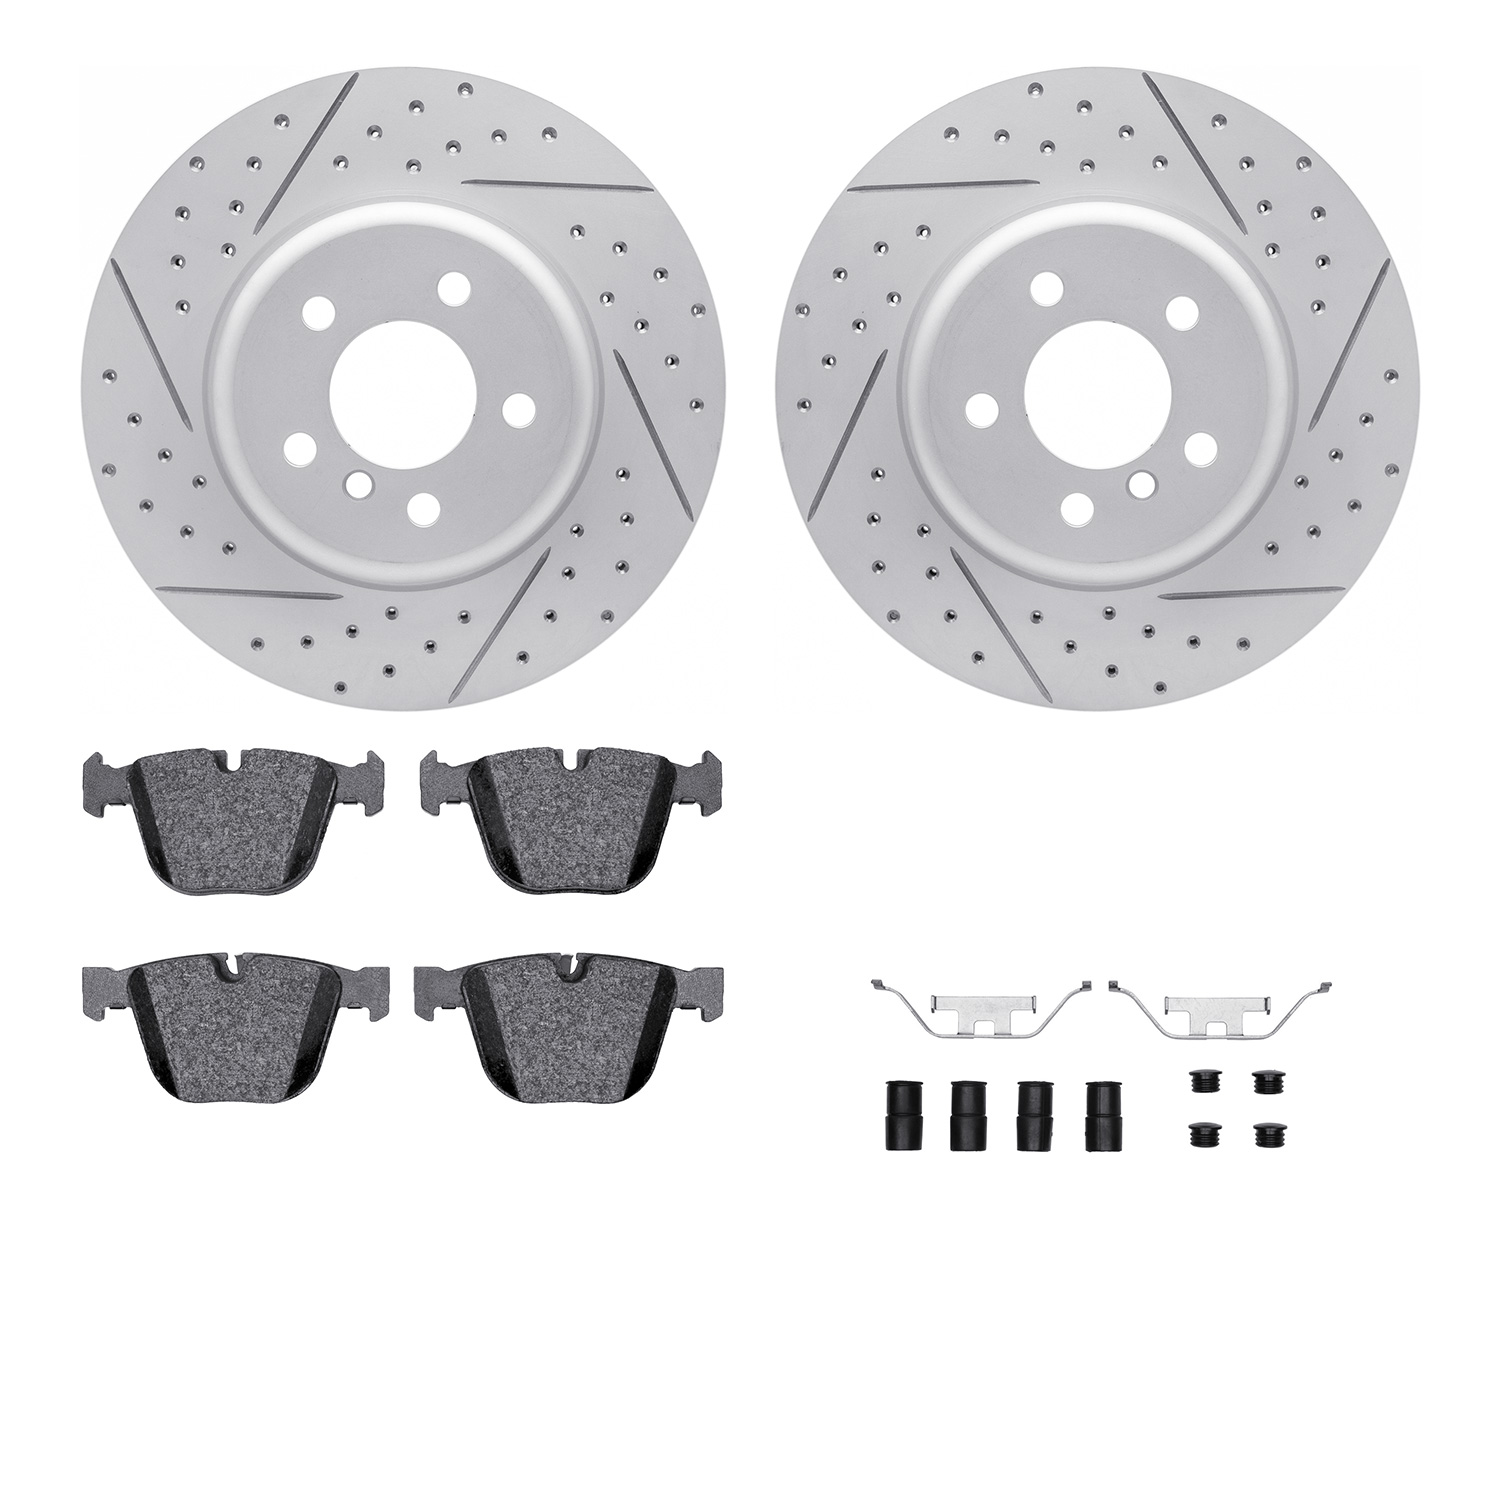 2512-31355 Geoperformance Drilled/Slotted Rotors w/5000 Advanced Brake Pads Kit & Hardware, 2011-2015 BMW, Position: Rear